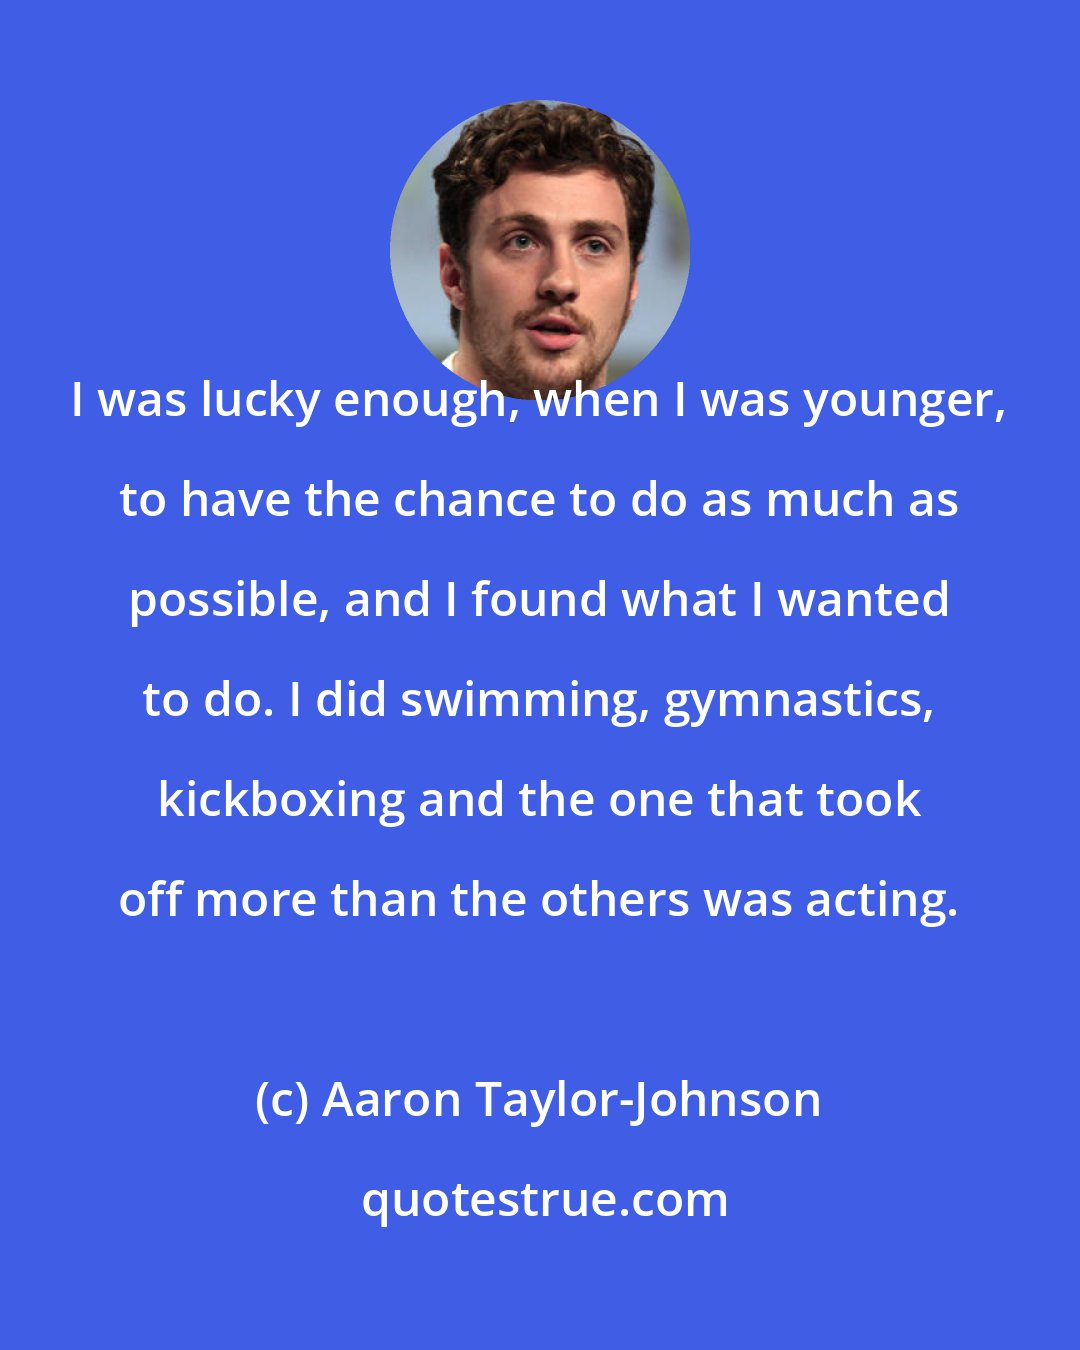 Aaron Taylor-Johnson: I was lucky enough, when I was younger, to have the chance to do as much as possible, and I found what I wanted to do. I did swimming, gymnastics, kickboxing and the one that took off more than the others was acting.